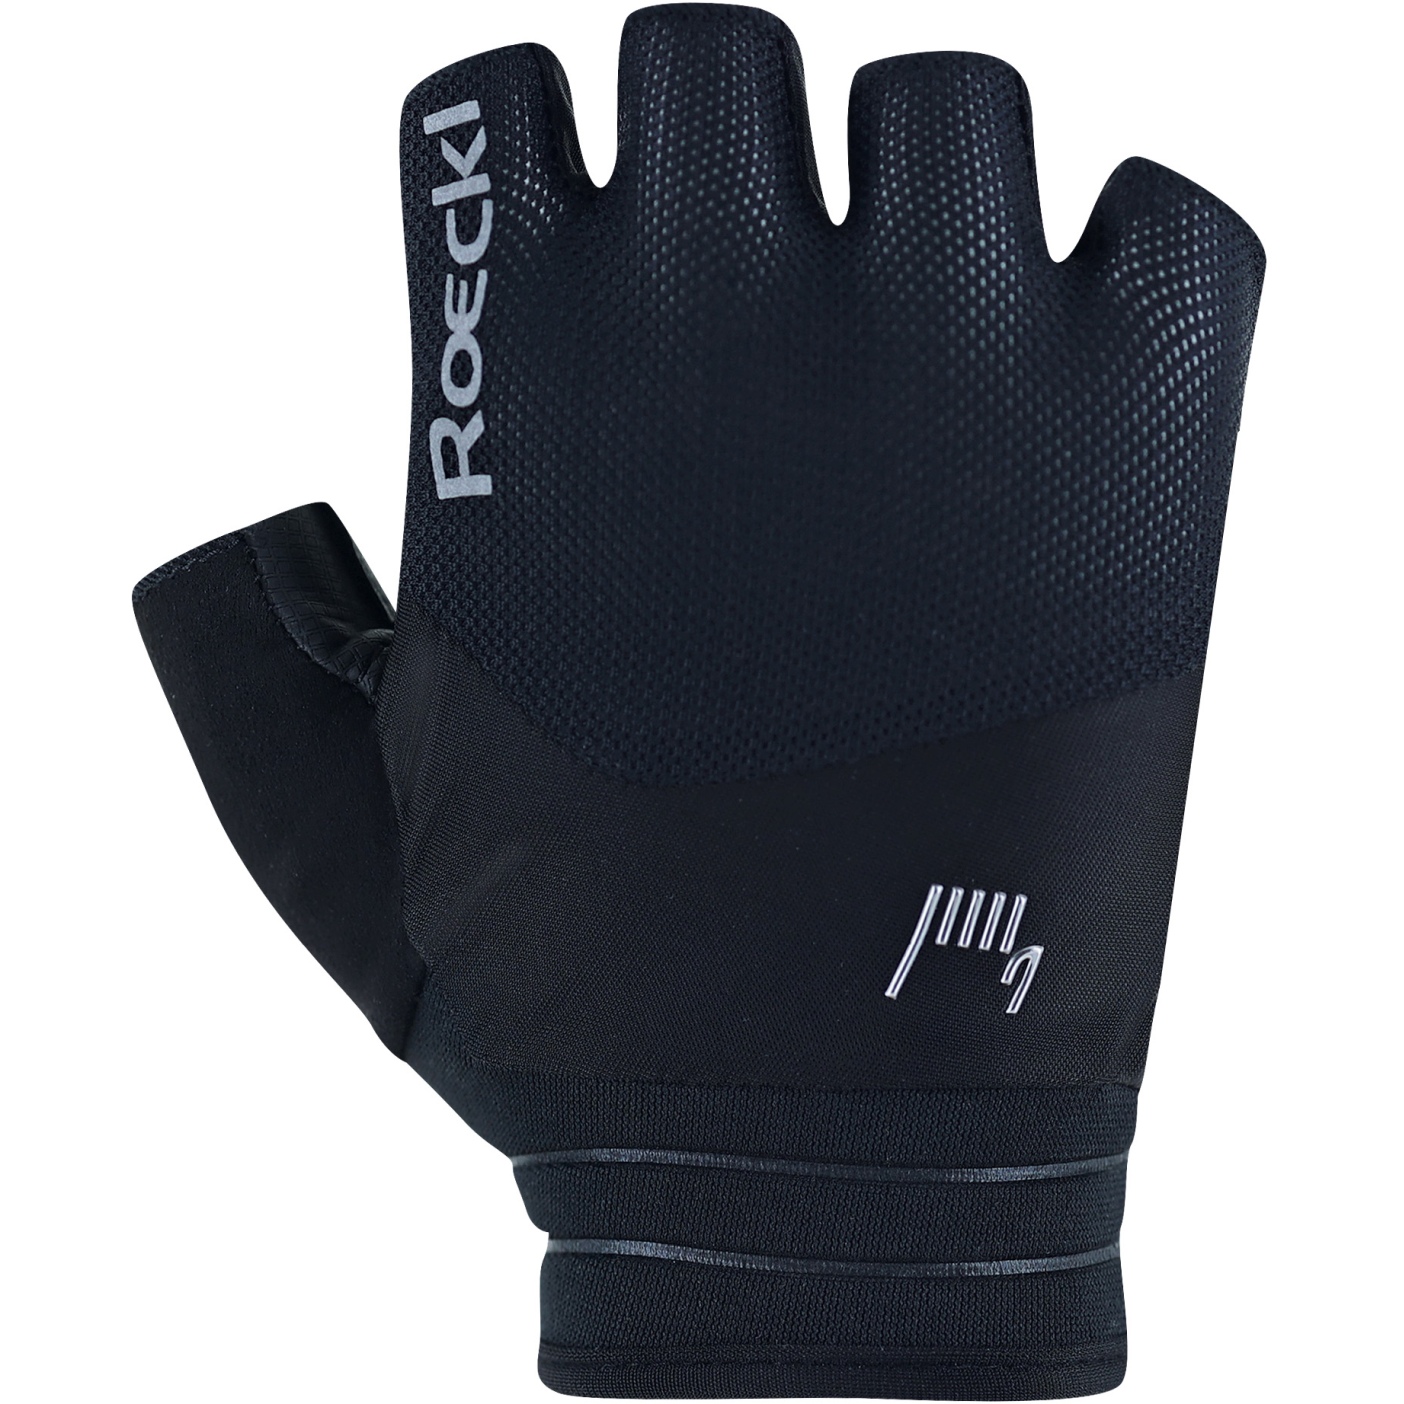 Picture of Roeckl Sports Bonau Cycling Gloves - black 9000